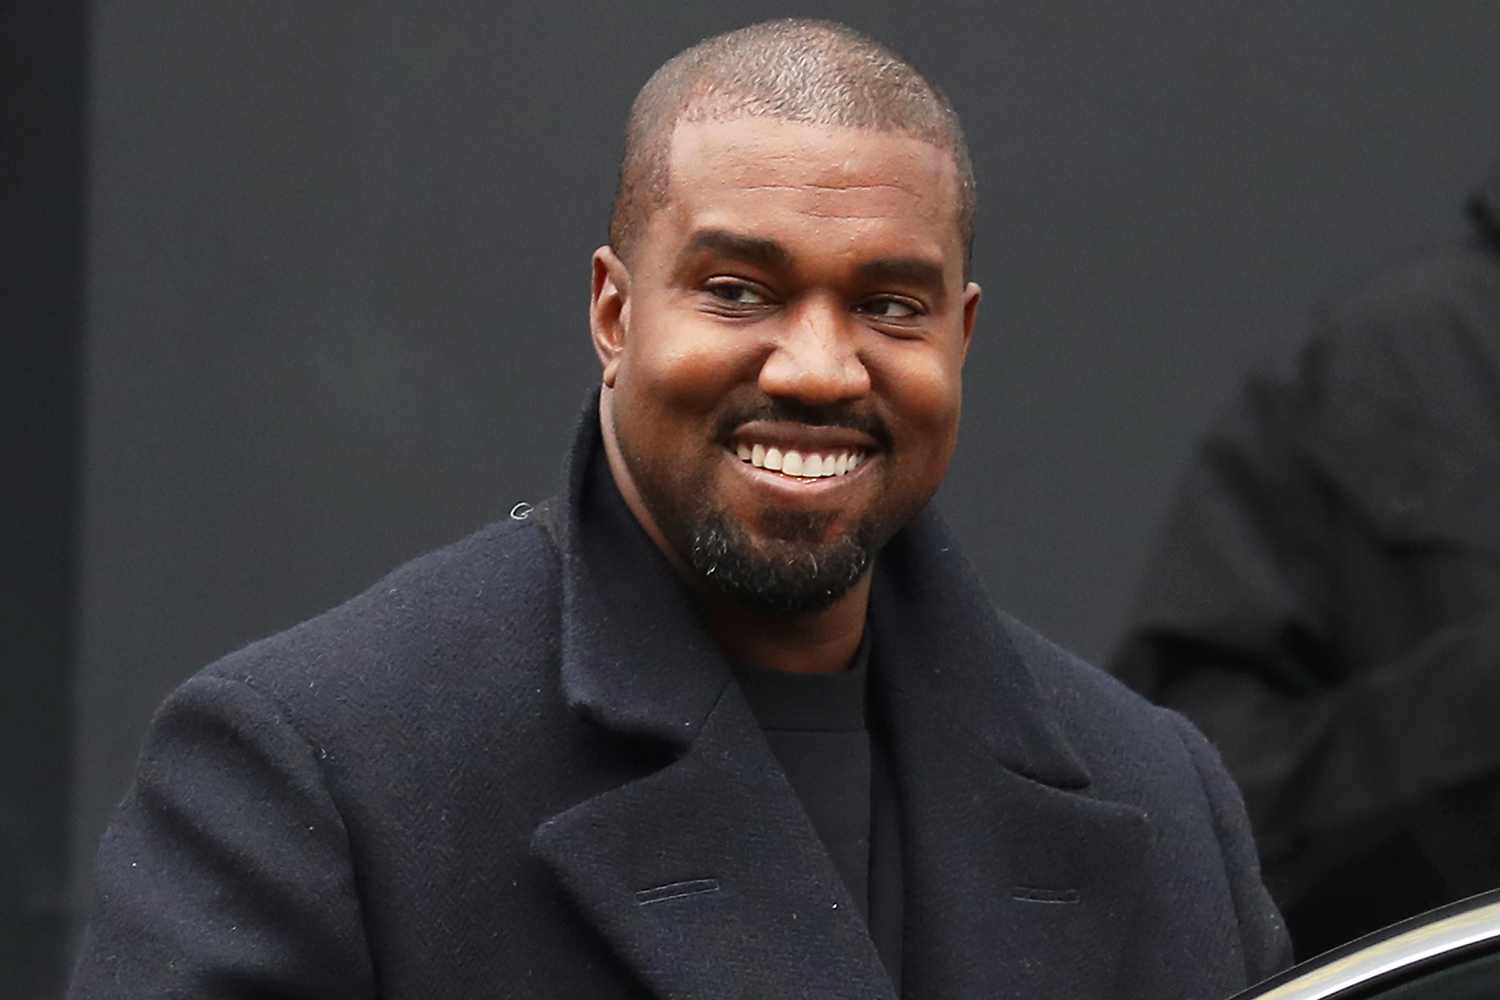 Twitter unblocked Kanye West's account, blocked for anti-Semitic remarks - the same day Musk bought the company